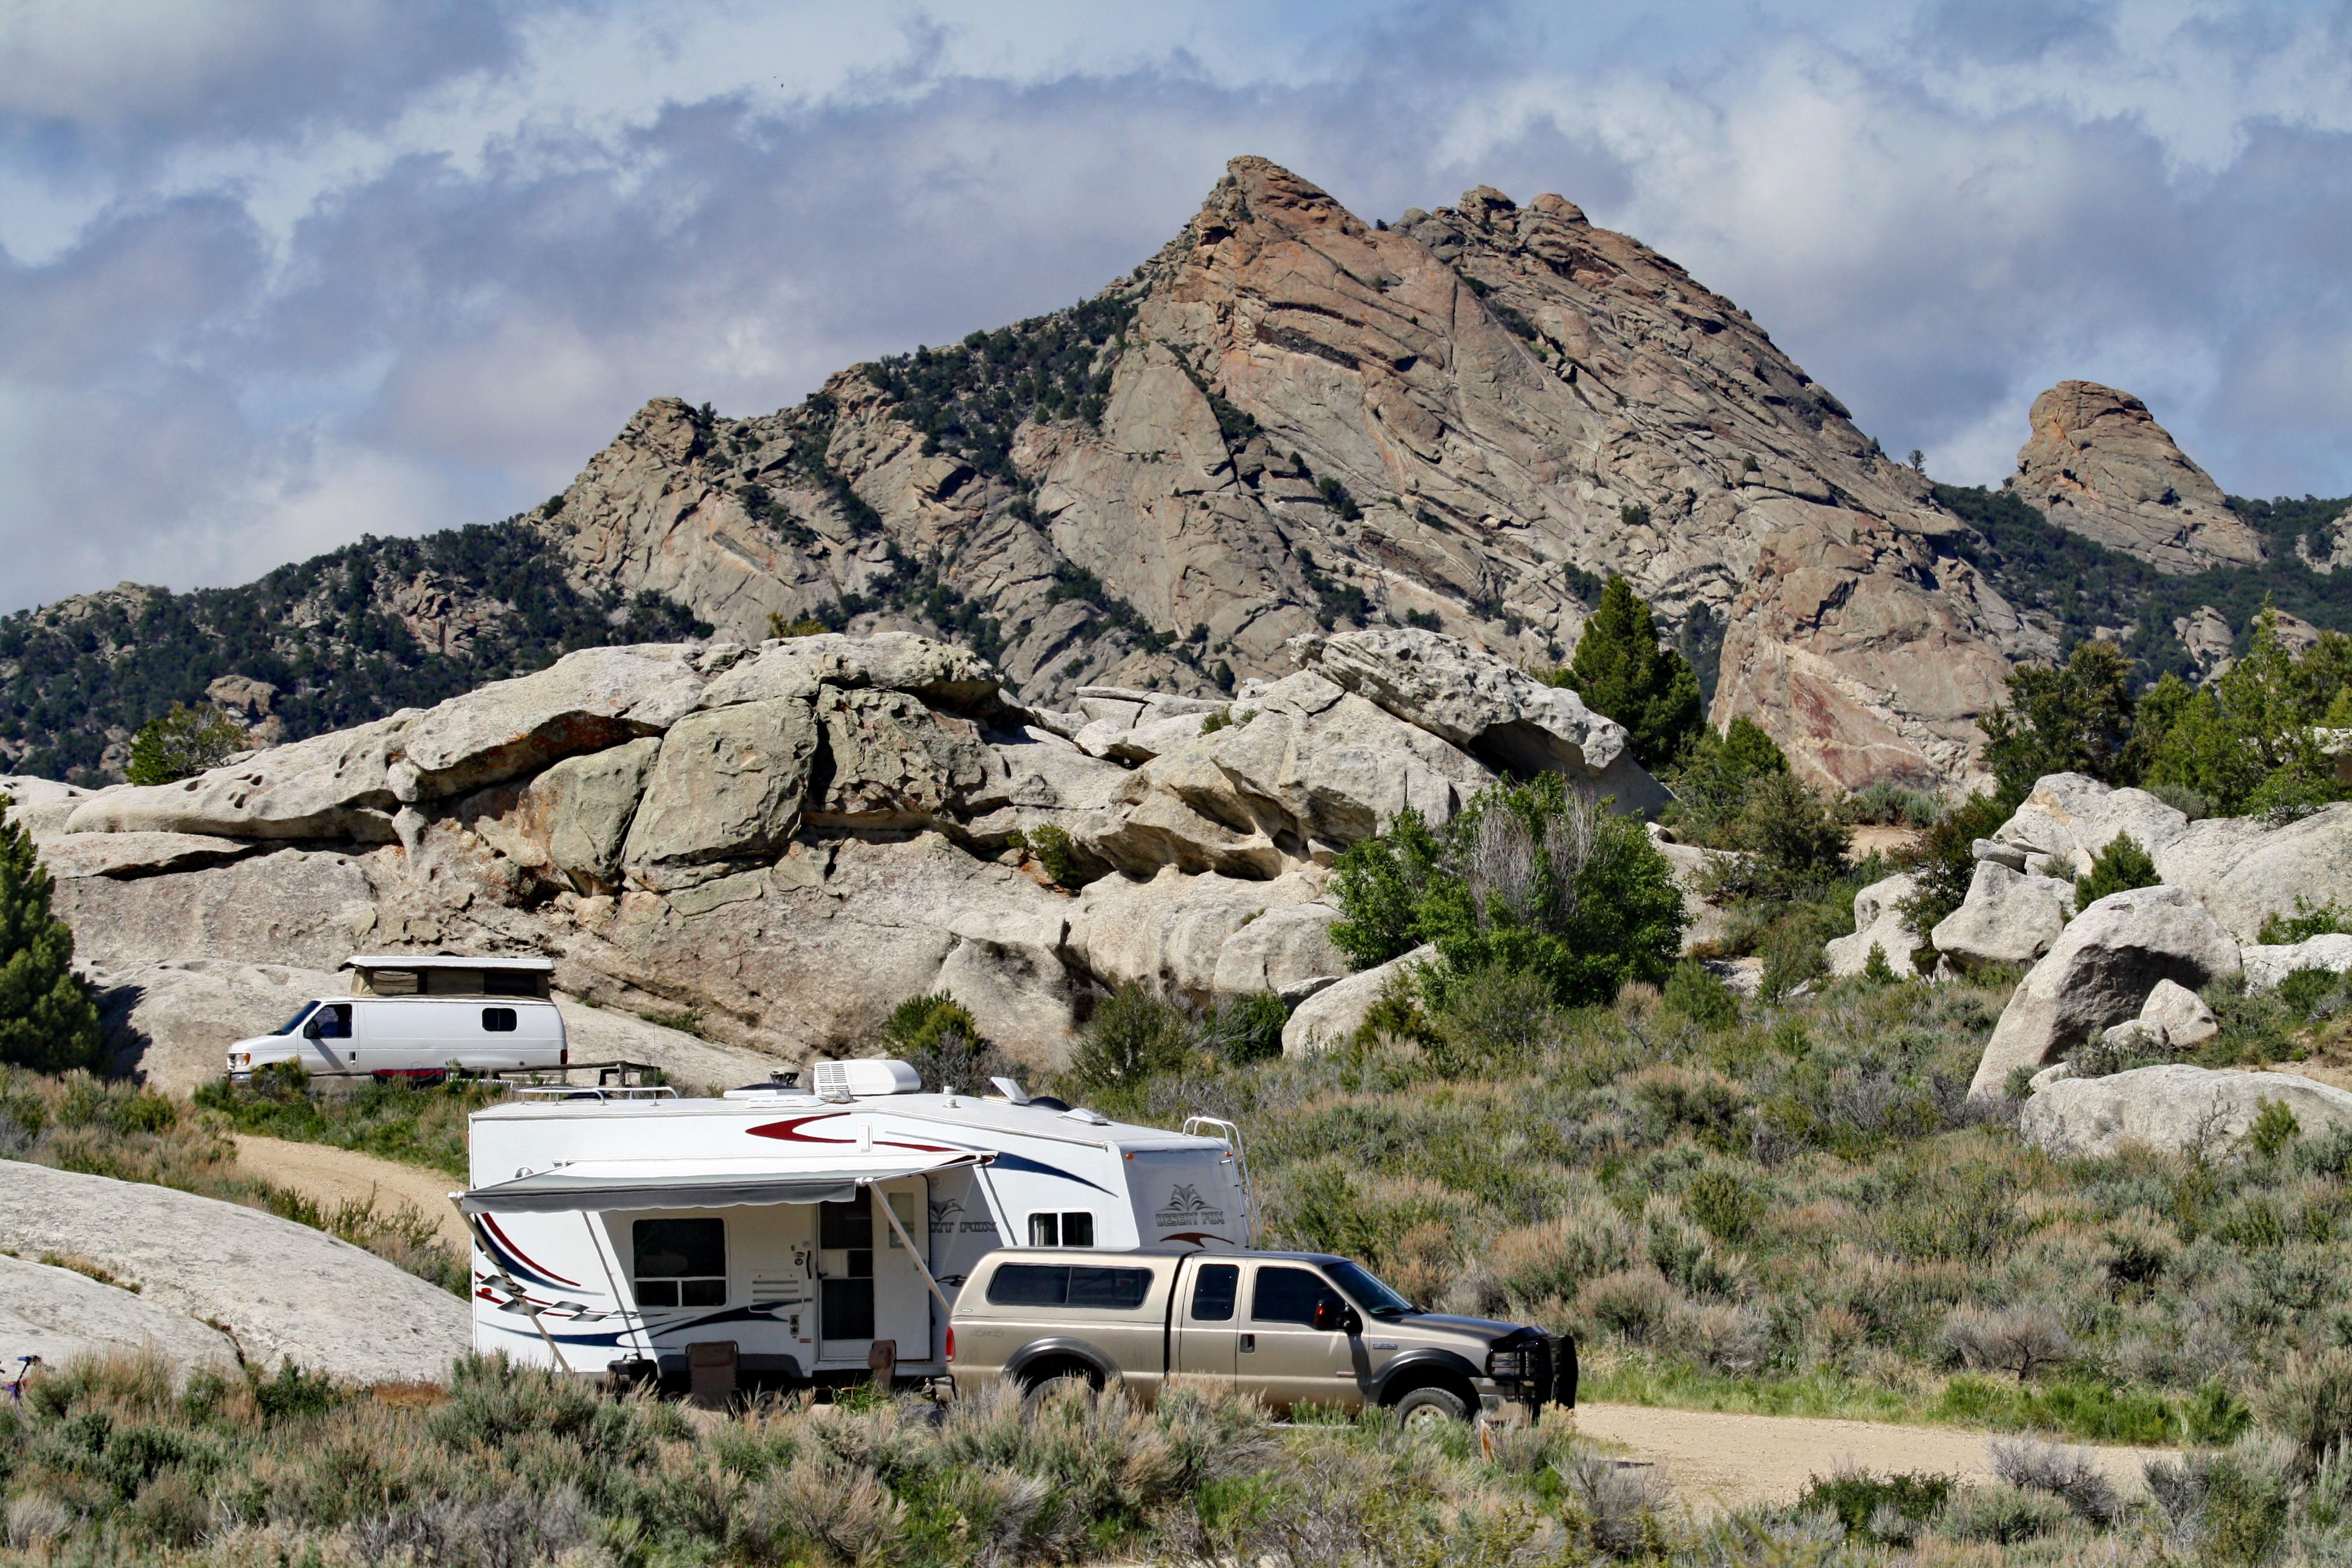 A camp trailer is parked with granite rocks behind